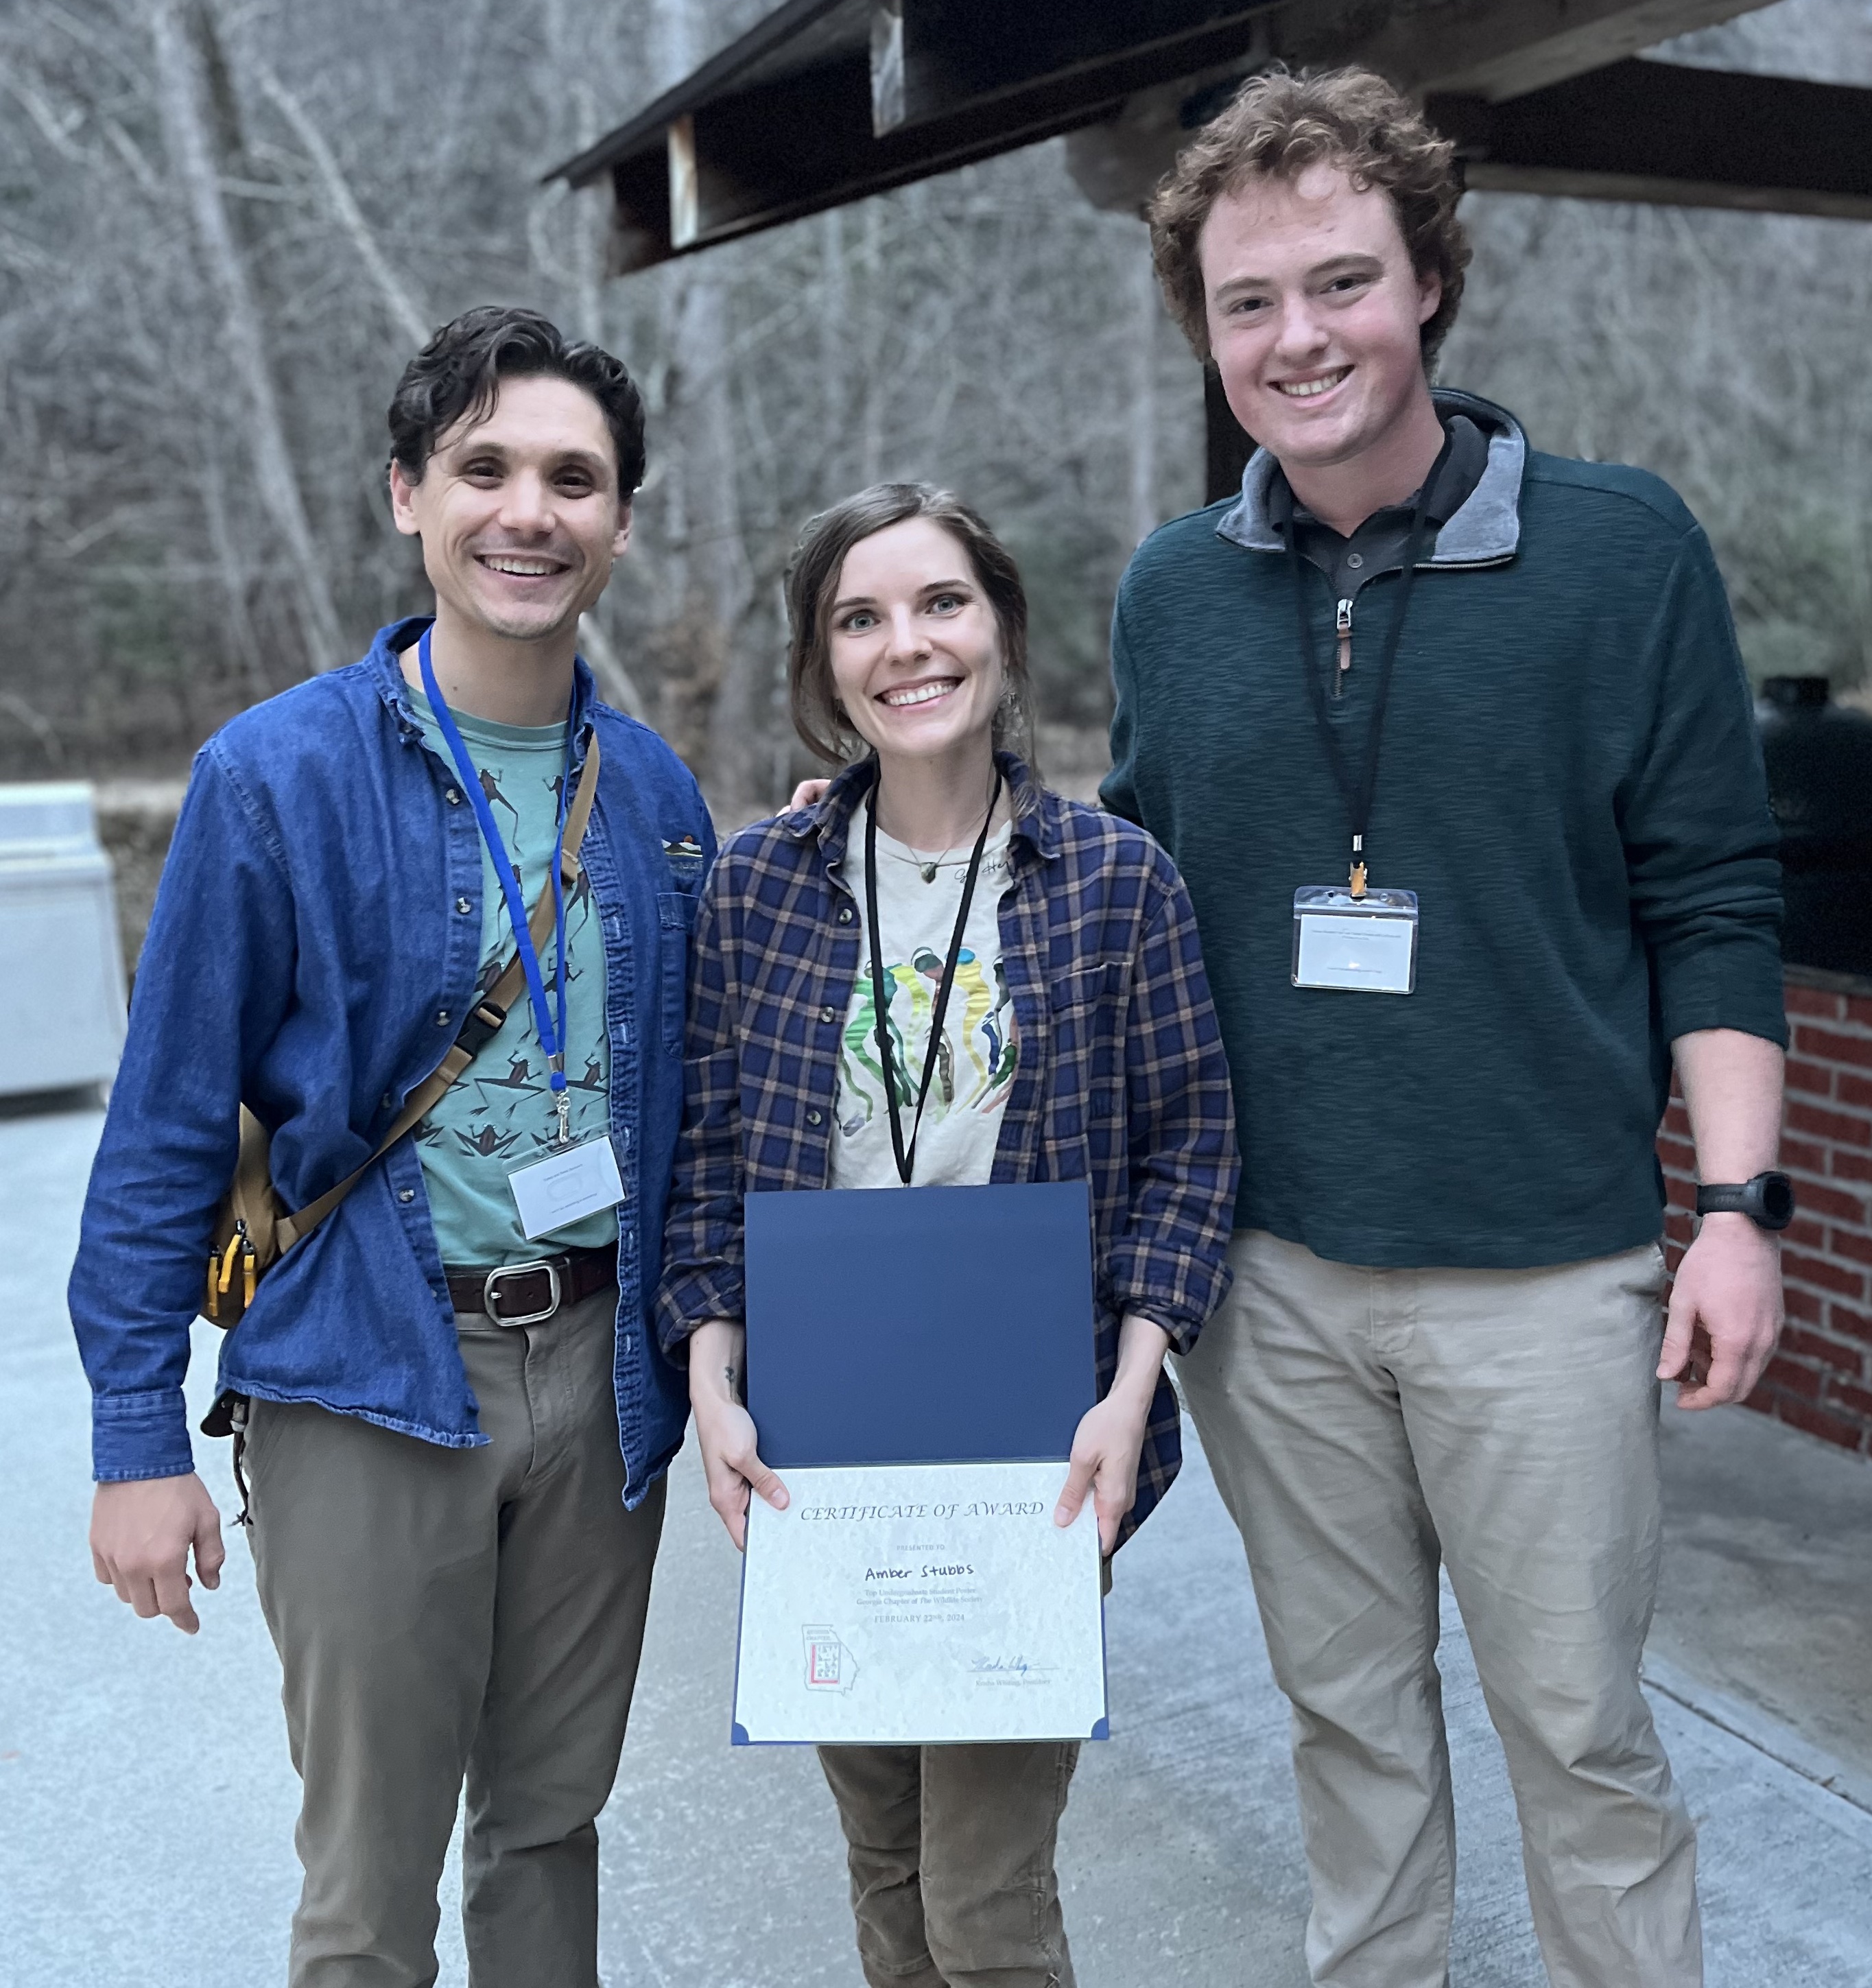 Dr. DeSantis (L) with students Amber Stubbs and Jack Powers